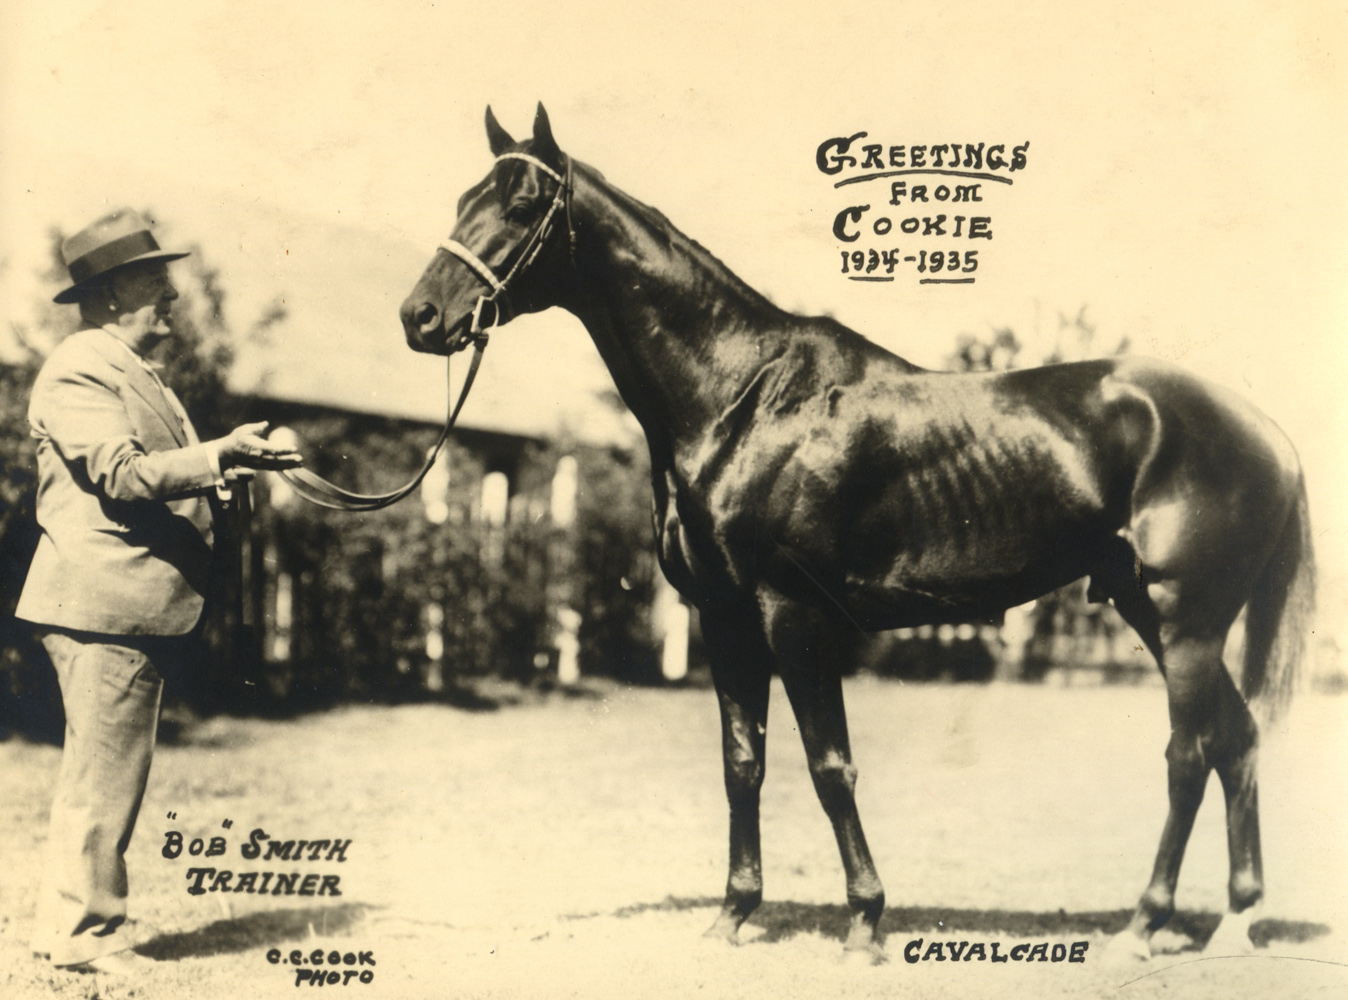 1934-35 photo-greeting card by C. C. Cook featuring trainer Bob Smith and Hall of Fame horse Cavalcade (C. C. Cook/Museum Collection)